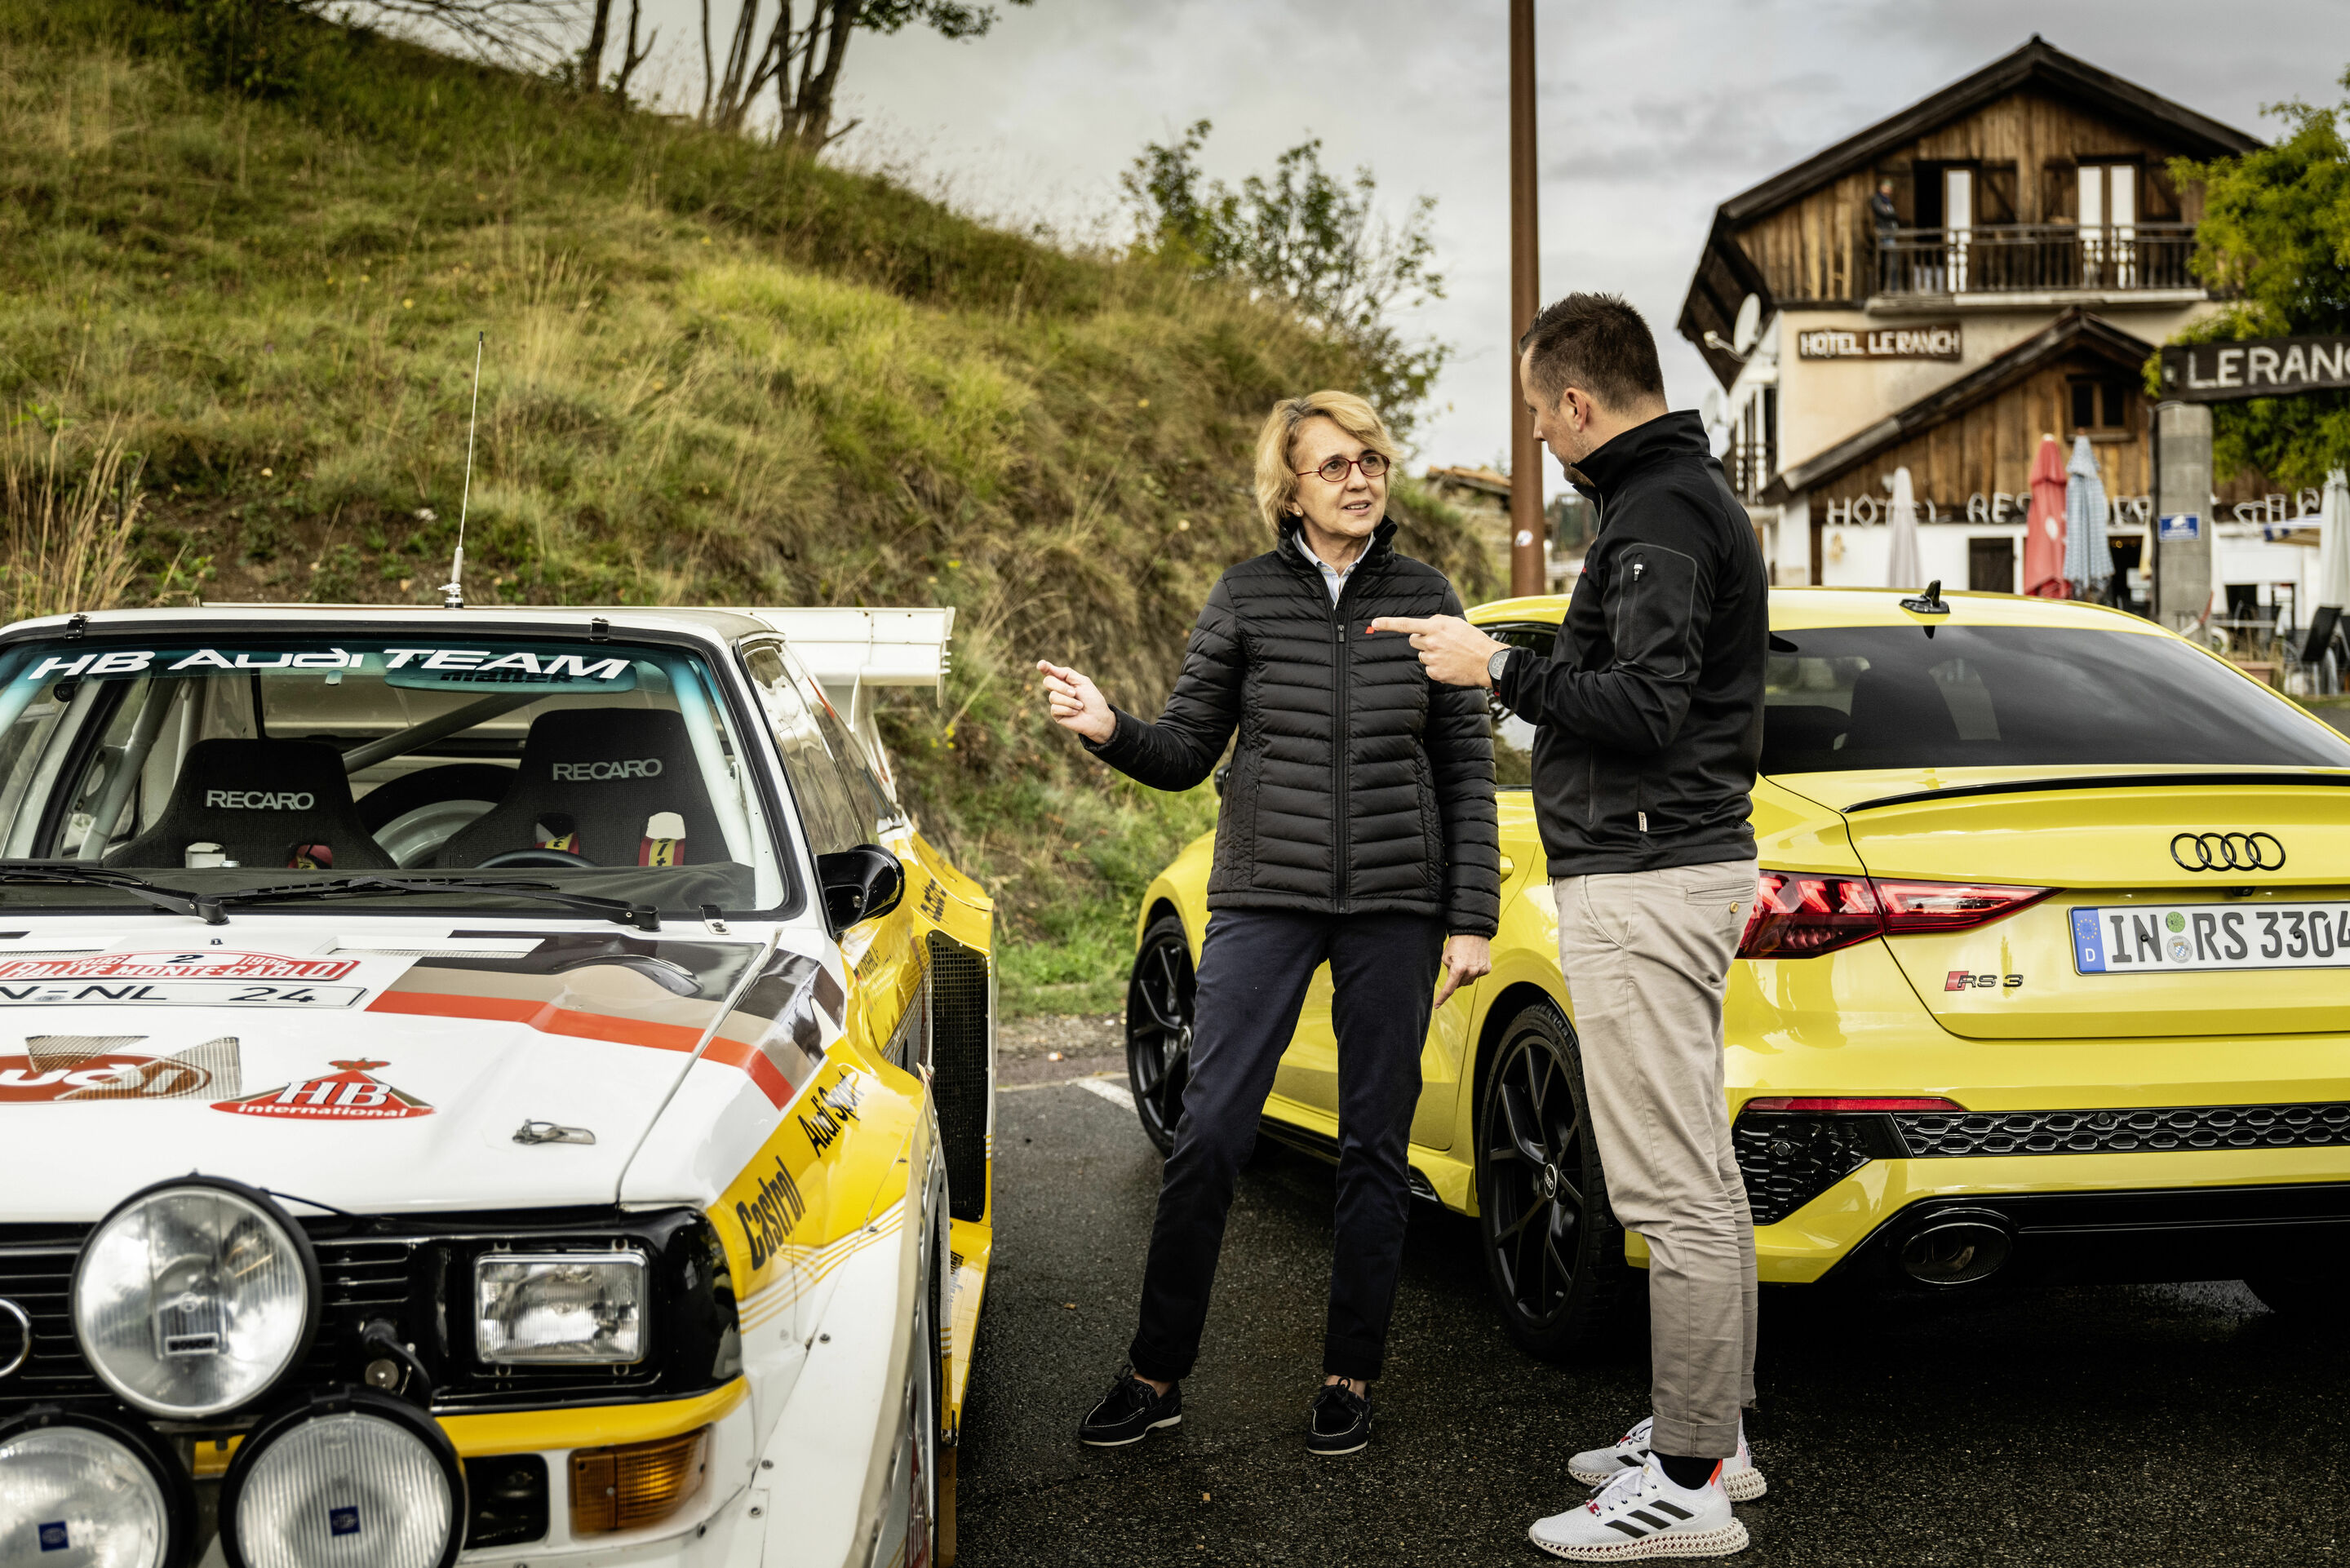 Rally co-driver Fabrizia Pons: “The quattro has never lost its grip on me”